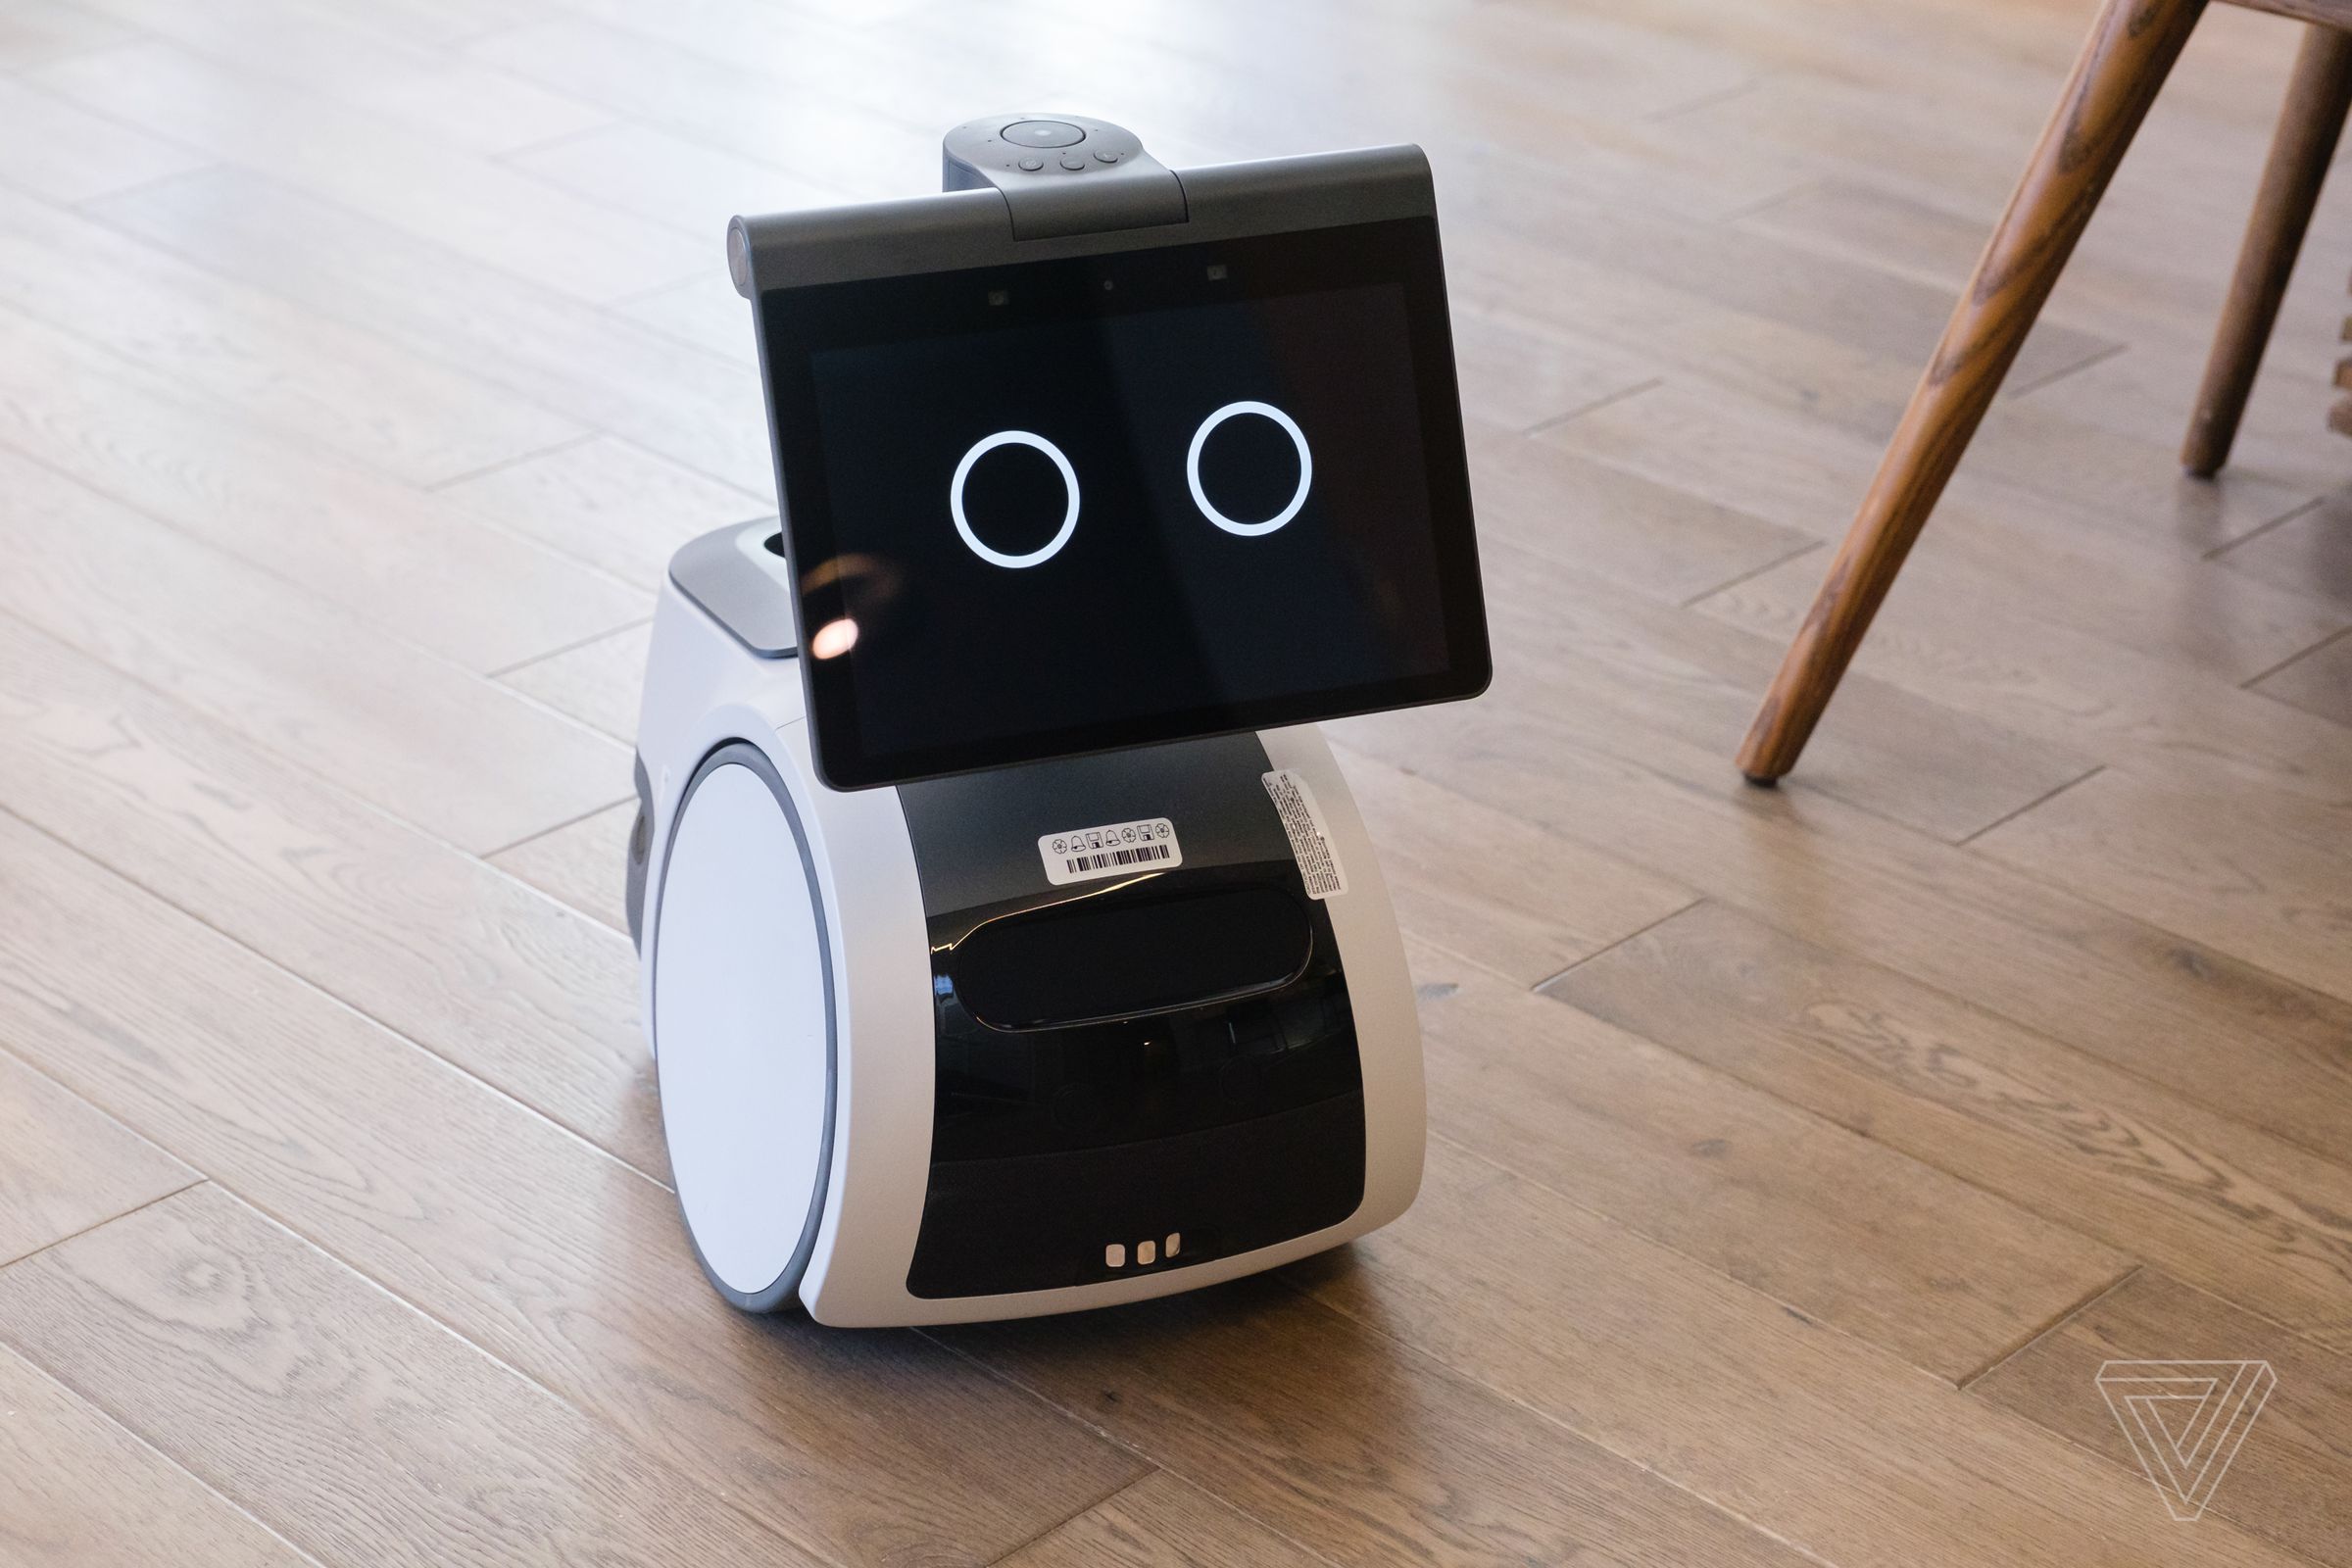 Amazon’s iRobot deal comes less than a year after it launched its own Astro robot.